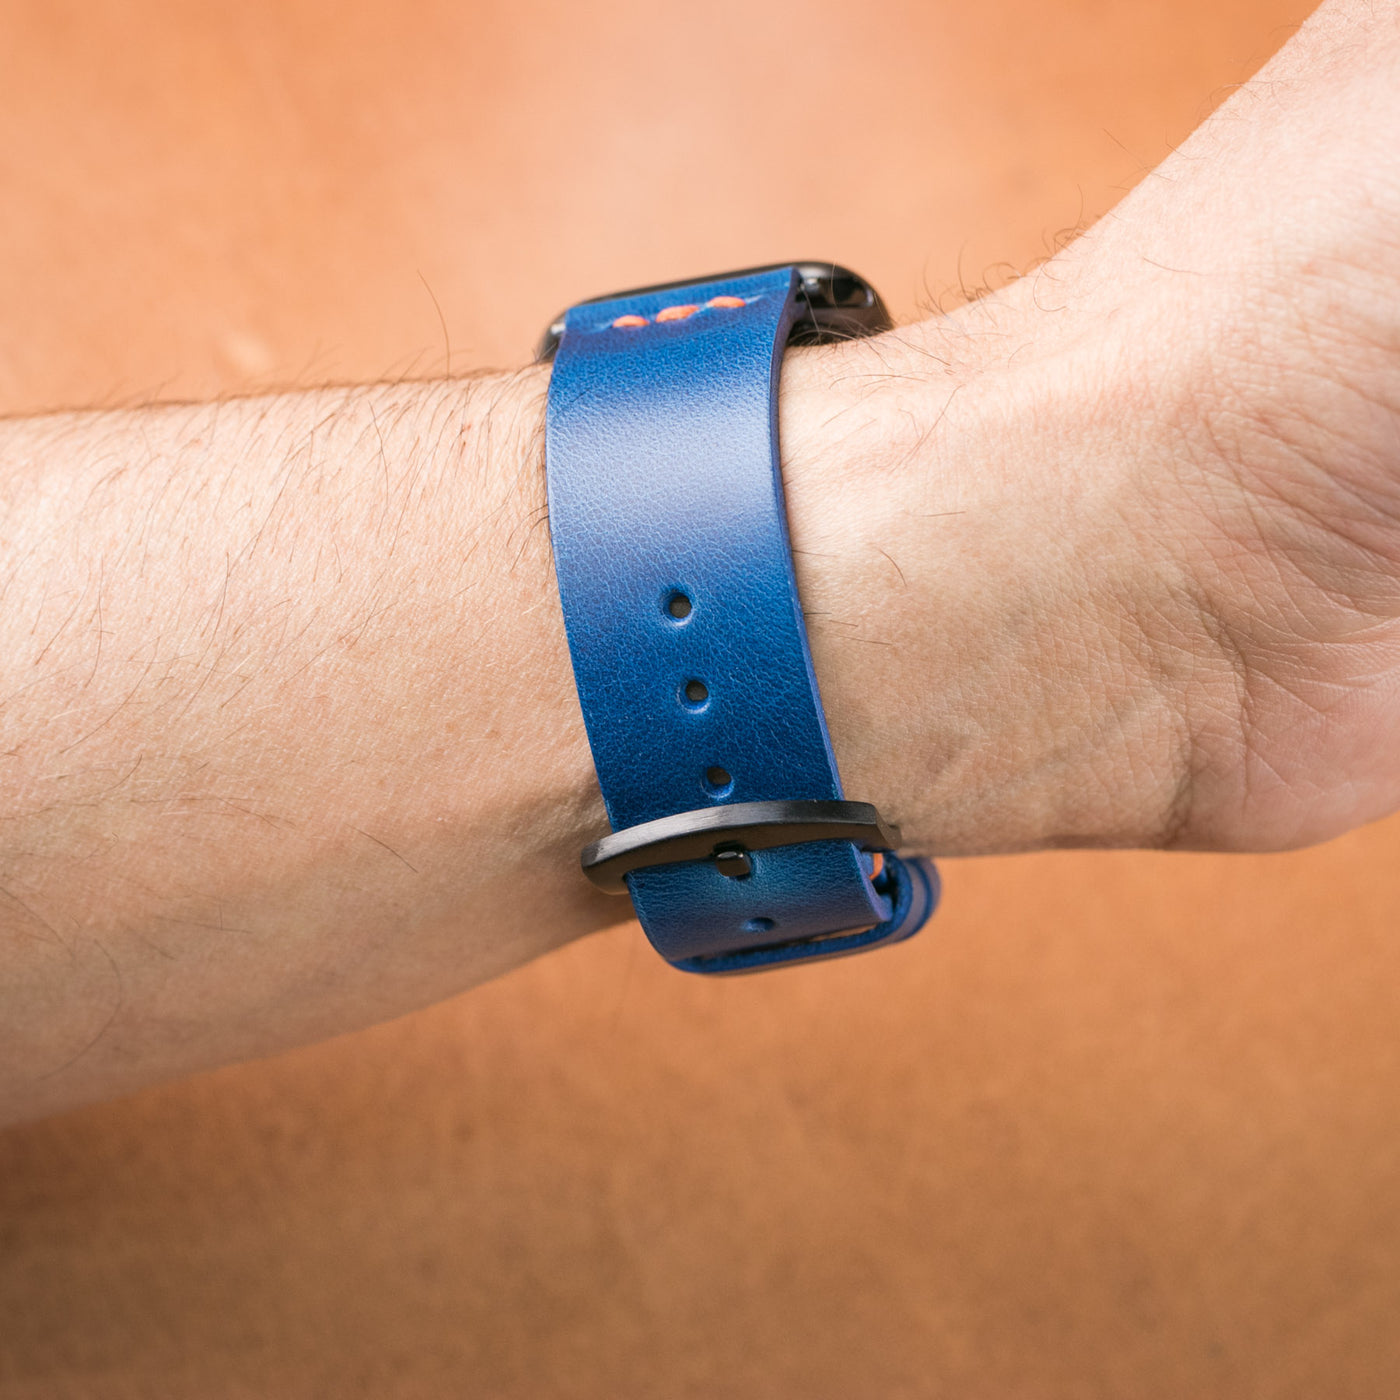 Apple Watch Leather Band - Cobalt Blue